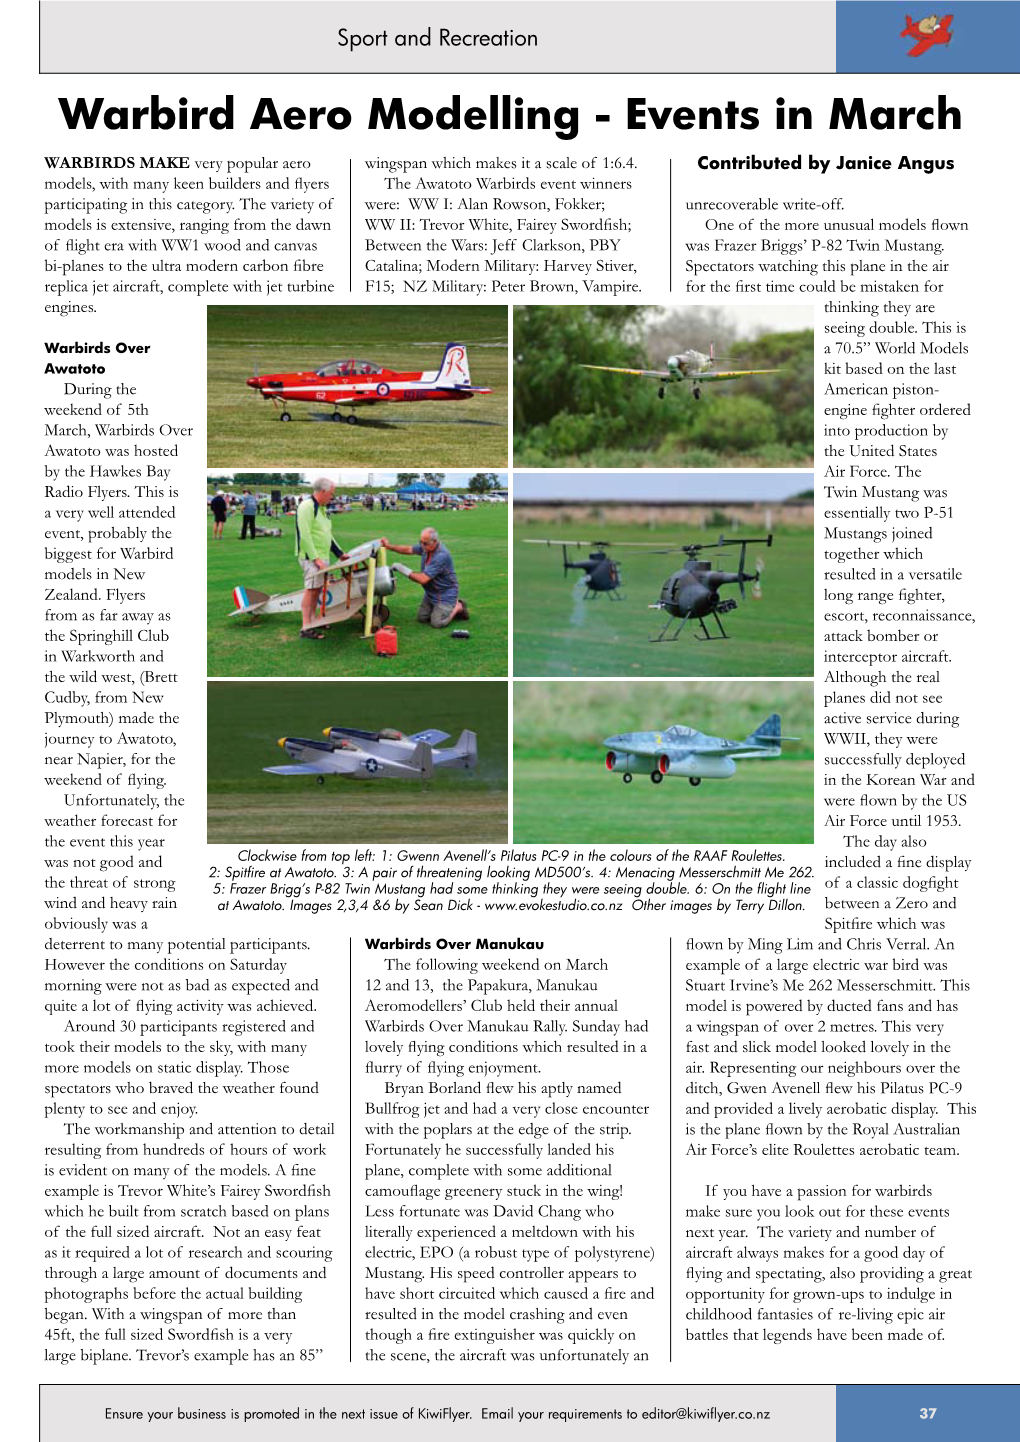 Warbird Aero Modelling - Events in March